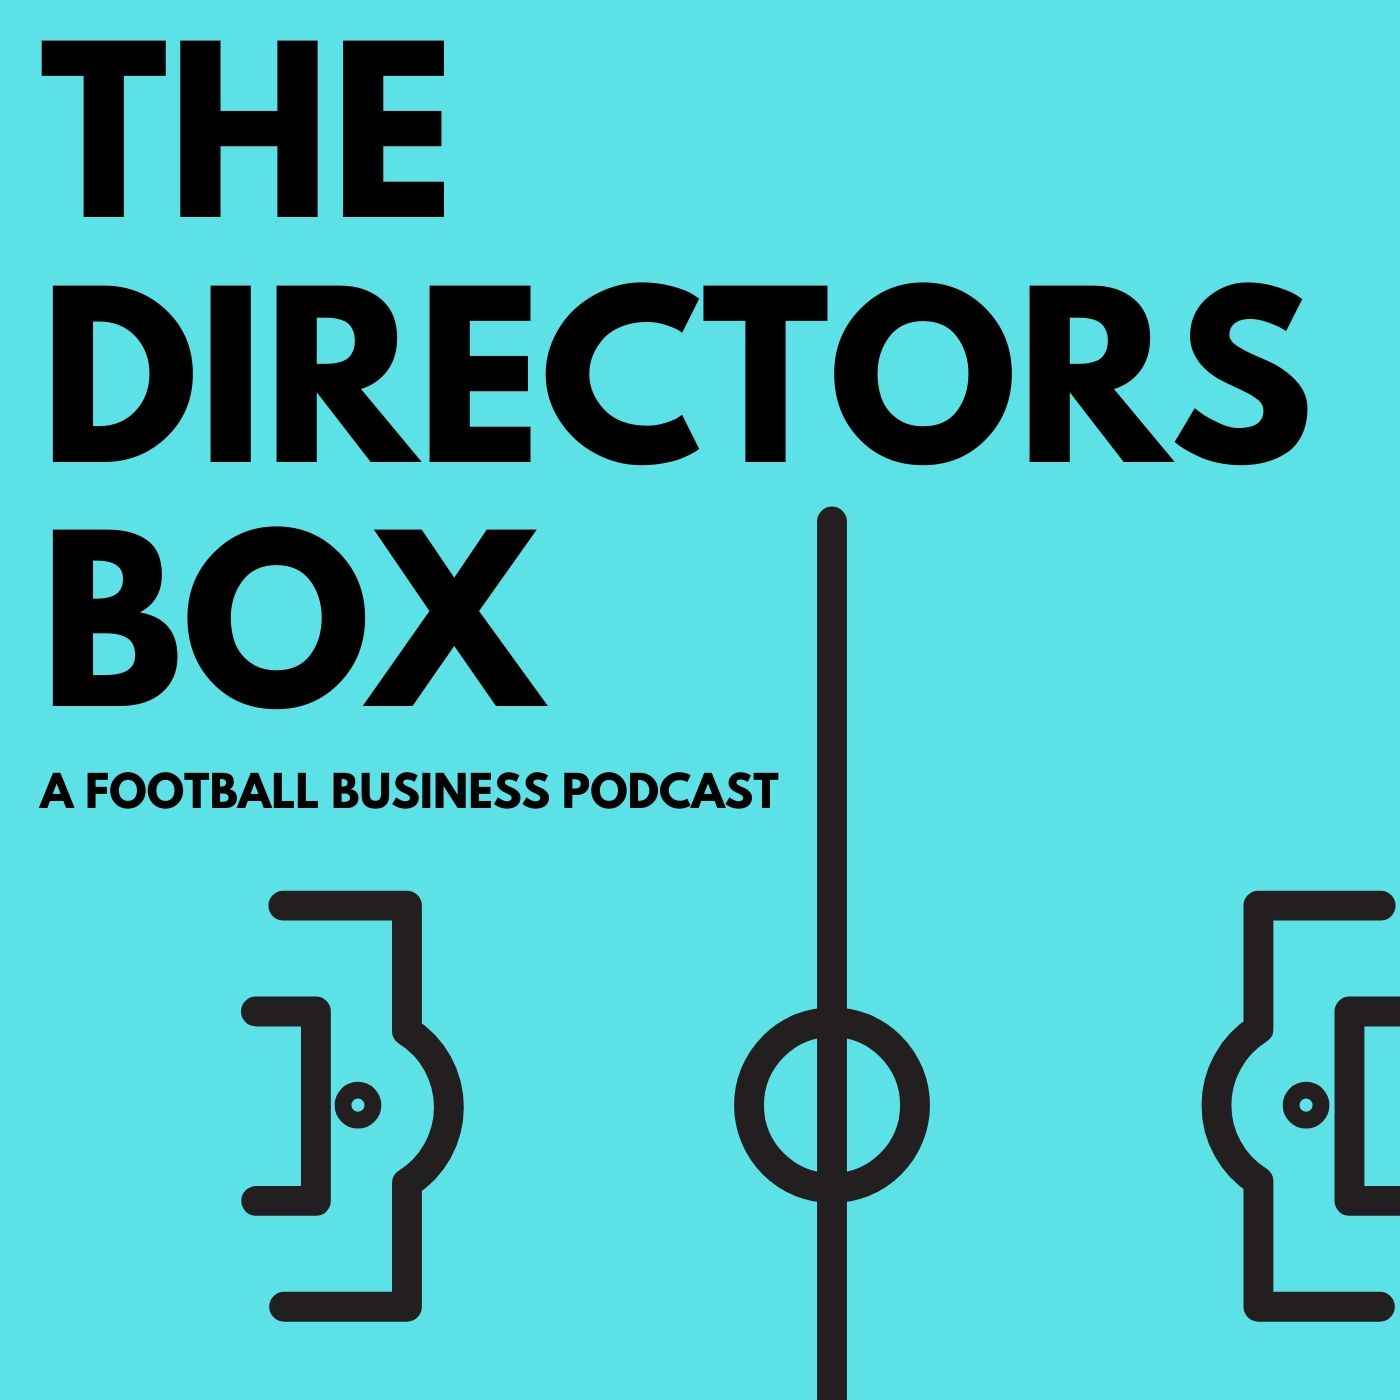 The Directors Box  |  A Football Business Podcast